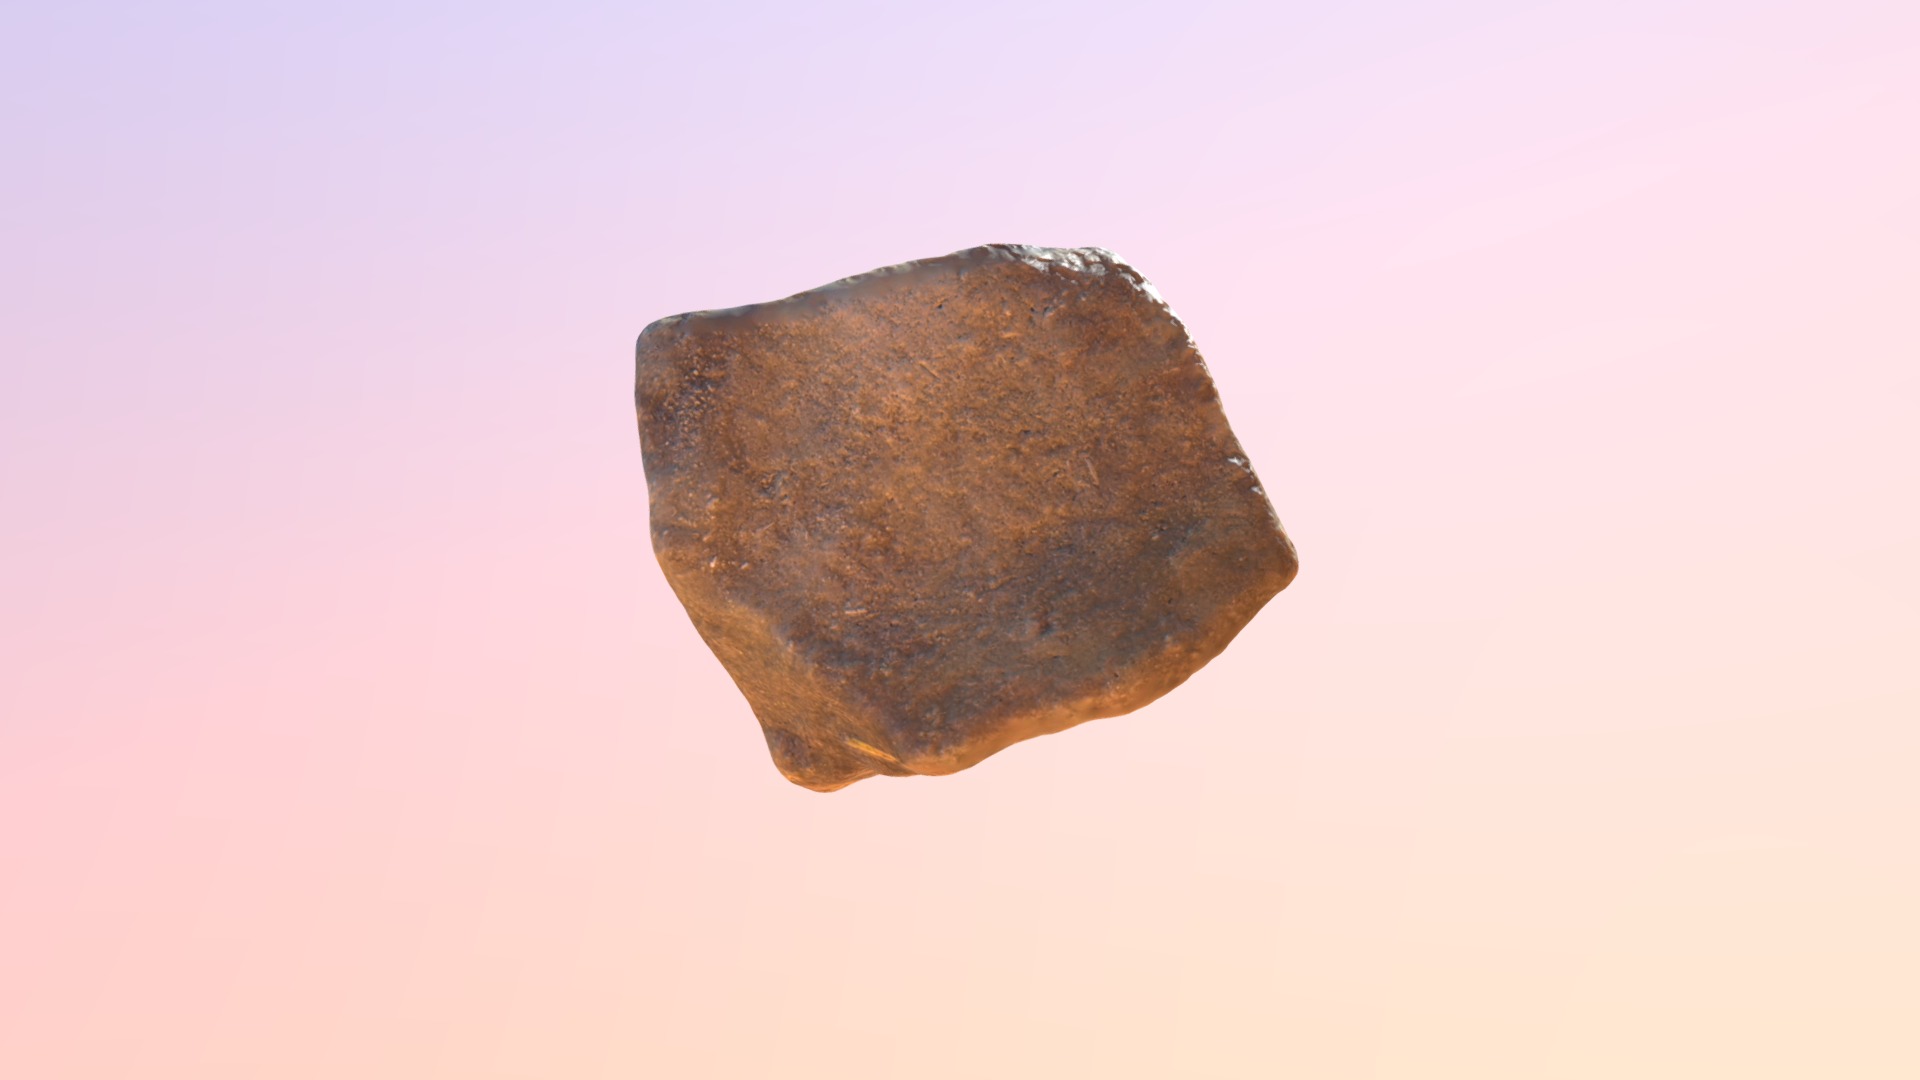 3D model Small Rock #4 - This is a 3D model of the Small Rock #4. The 3D model is about a rock on a blue background.